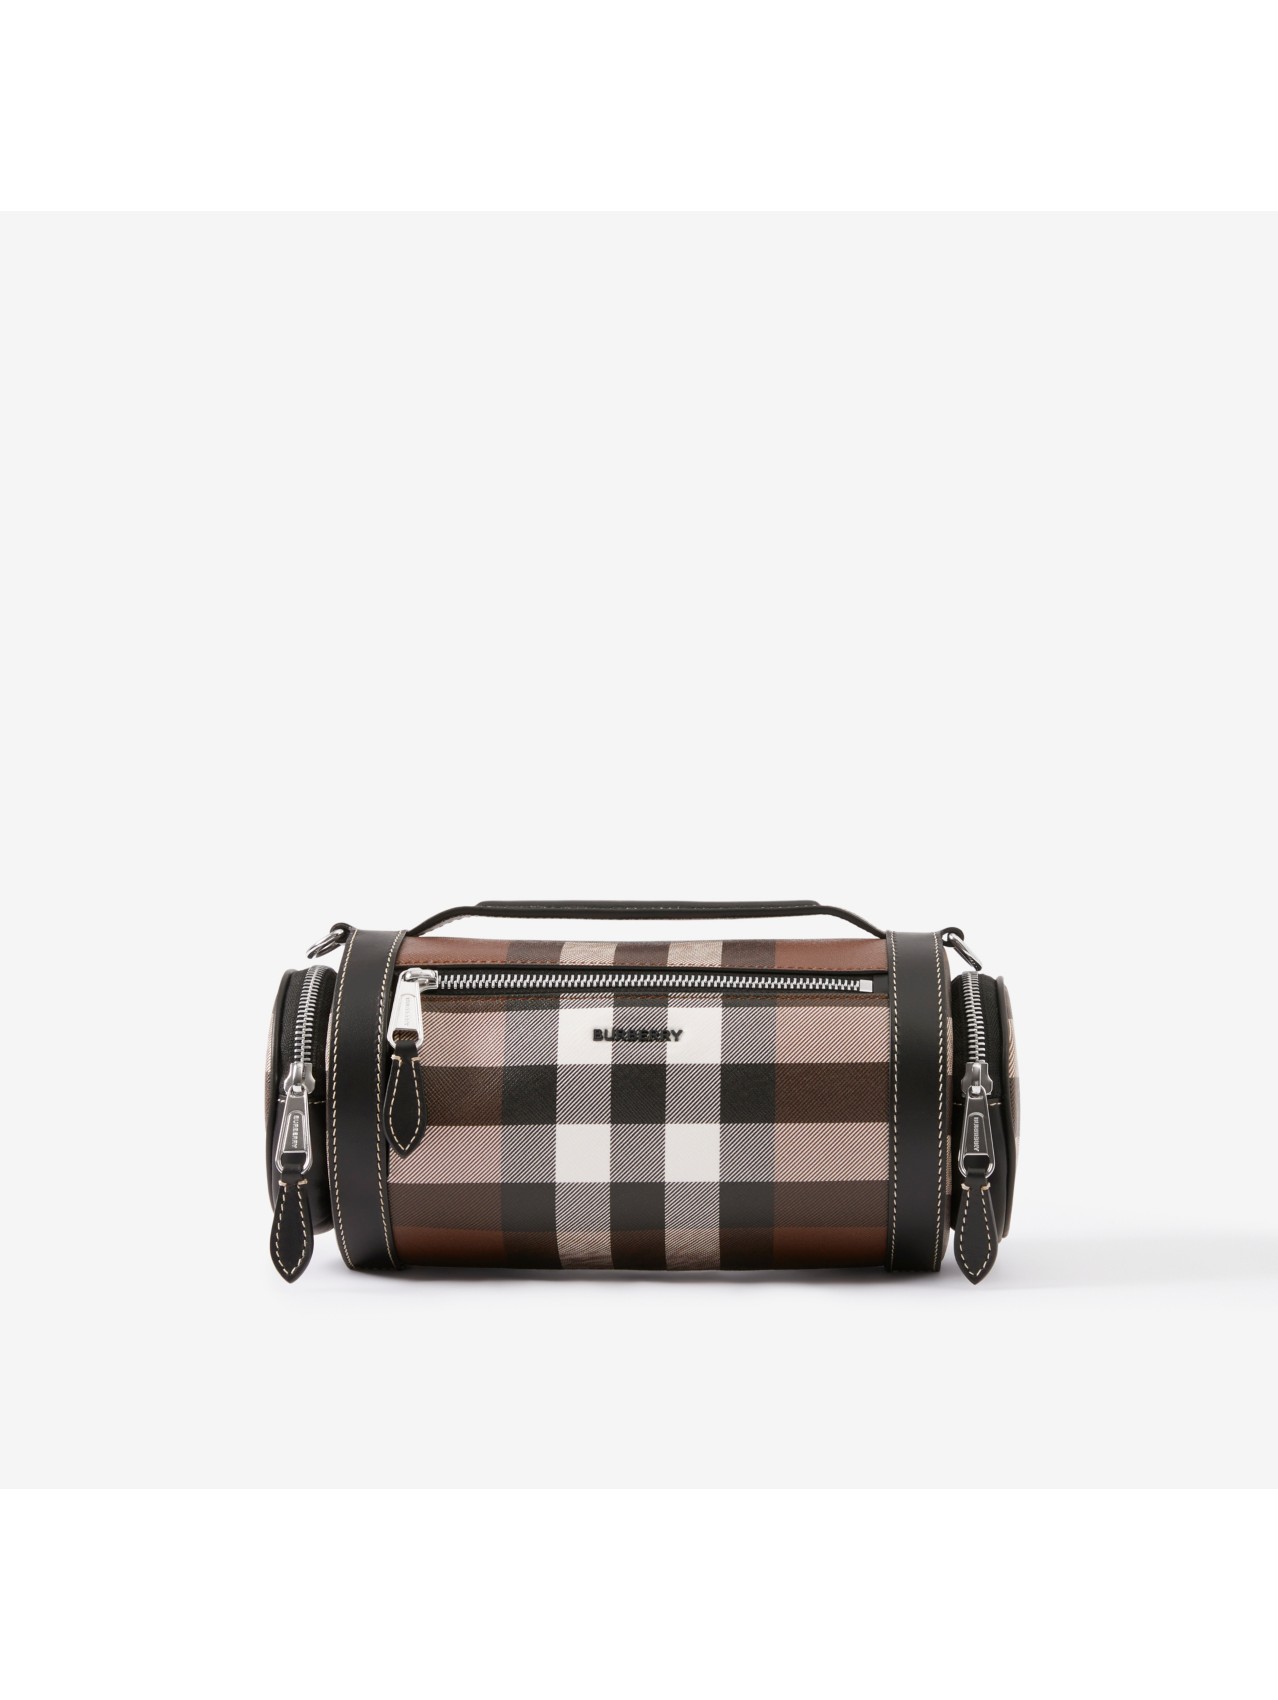 Men's Bags | Check & Leather Bags for Men | Burberry® Official